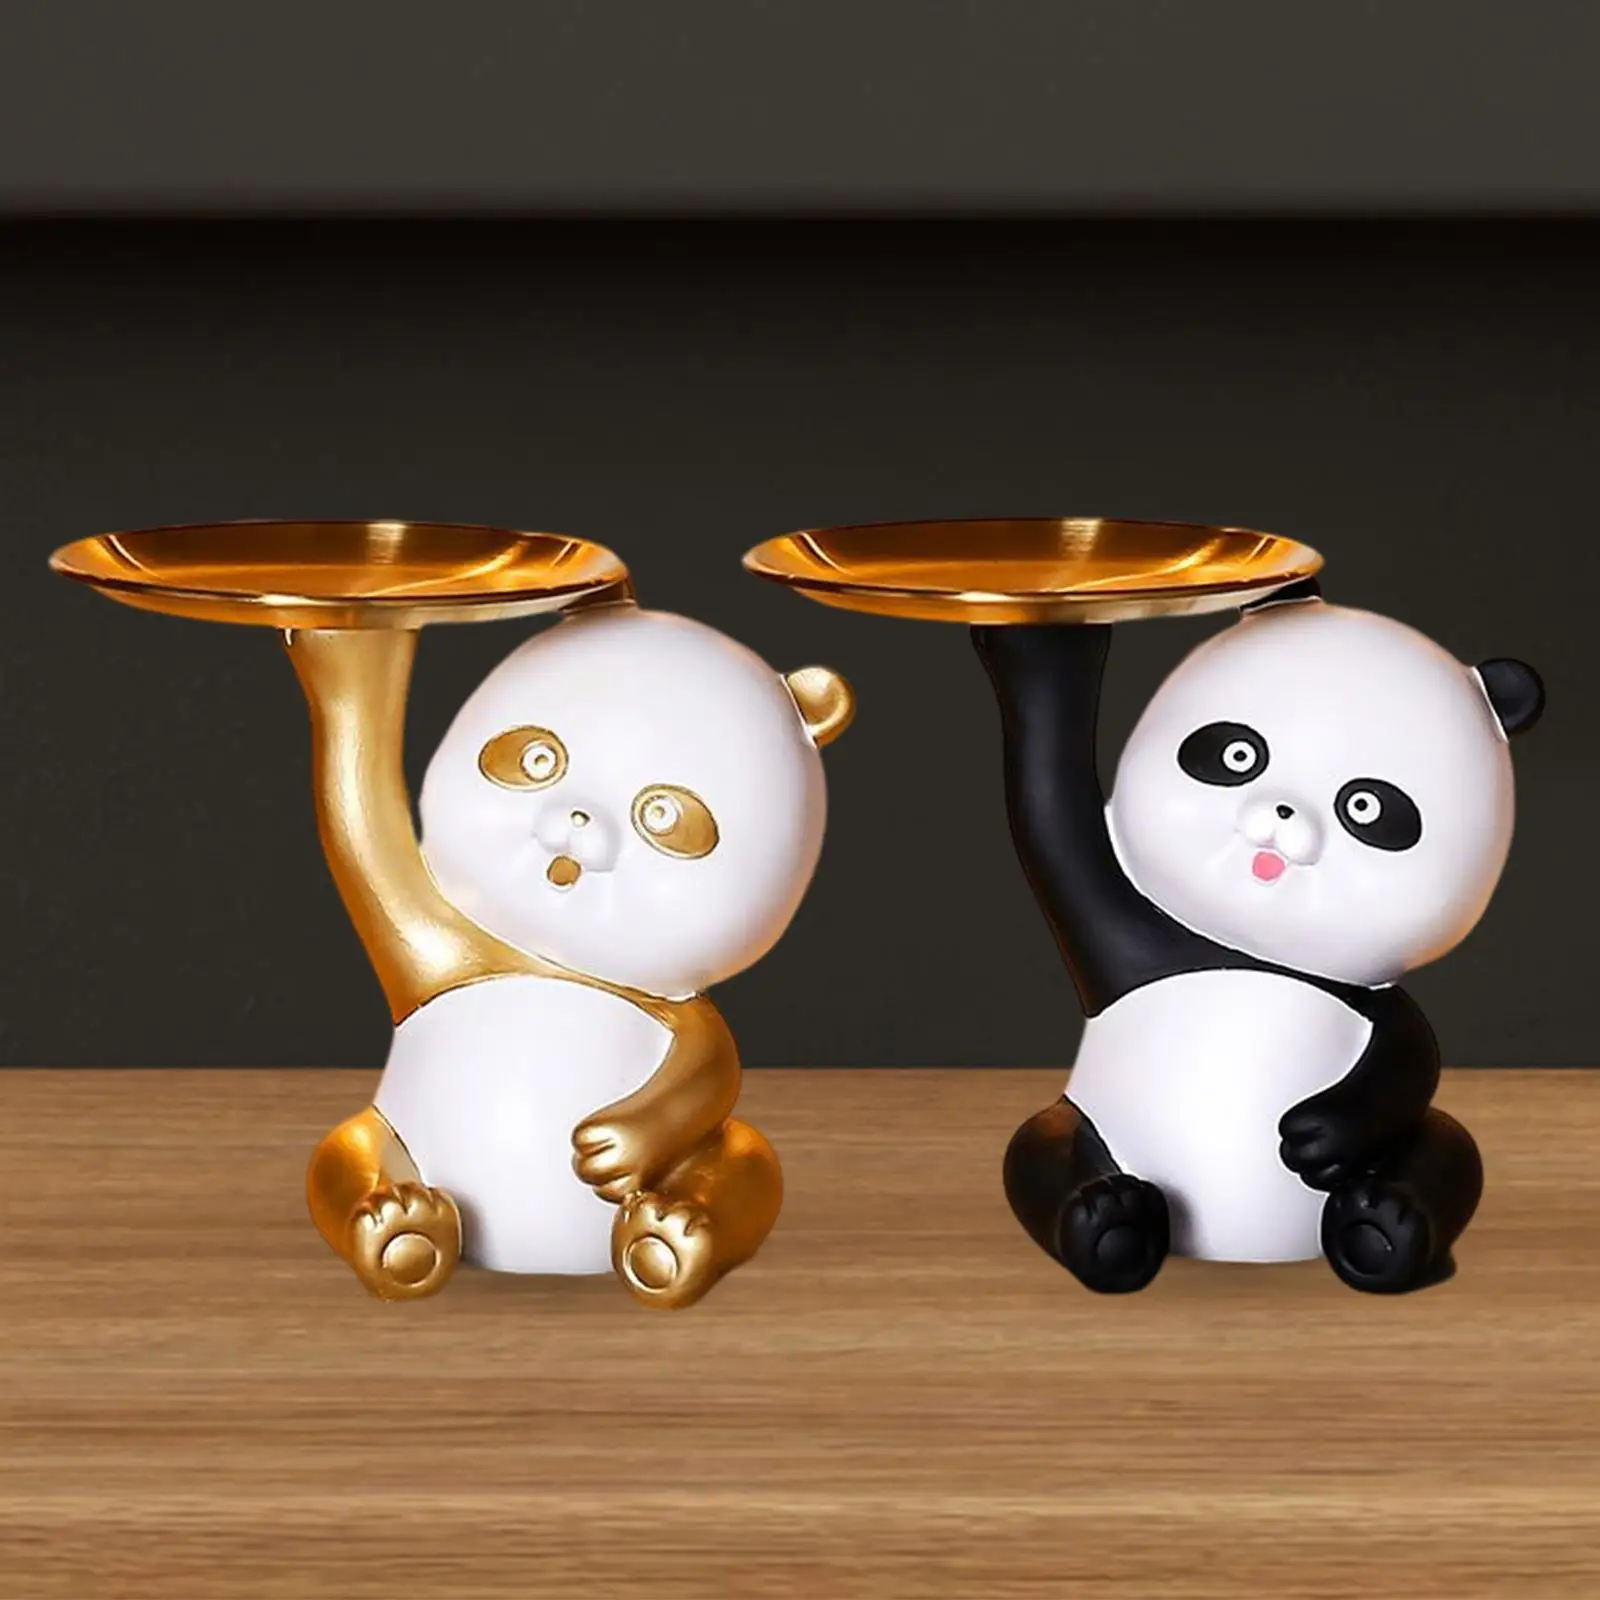 Multifunction Panda Figurine Holding Storage Tray Sundries Container Desk Storage Statue Ornament for Table Desktop Decoration